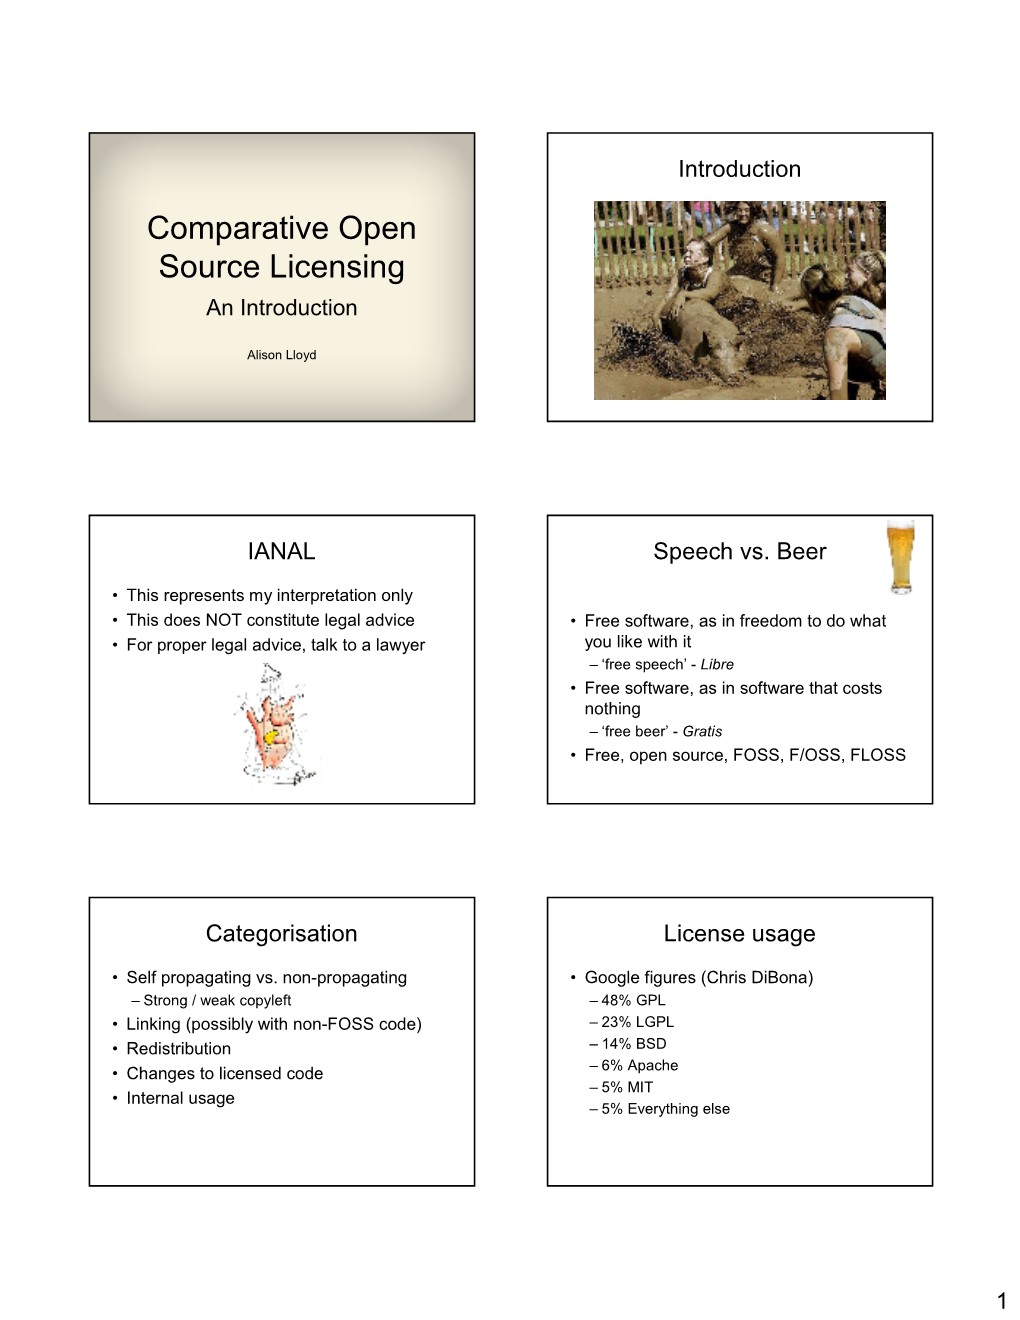 Comparative Open Source Licensing an Introduction